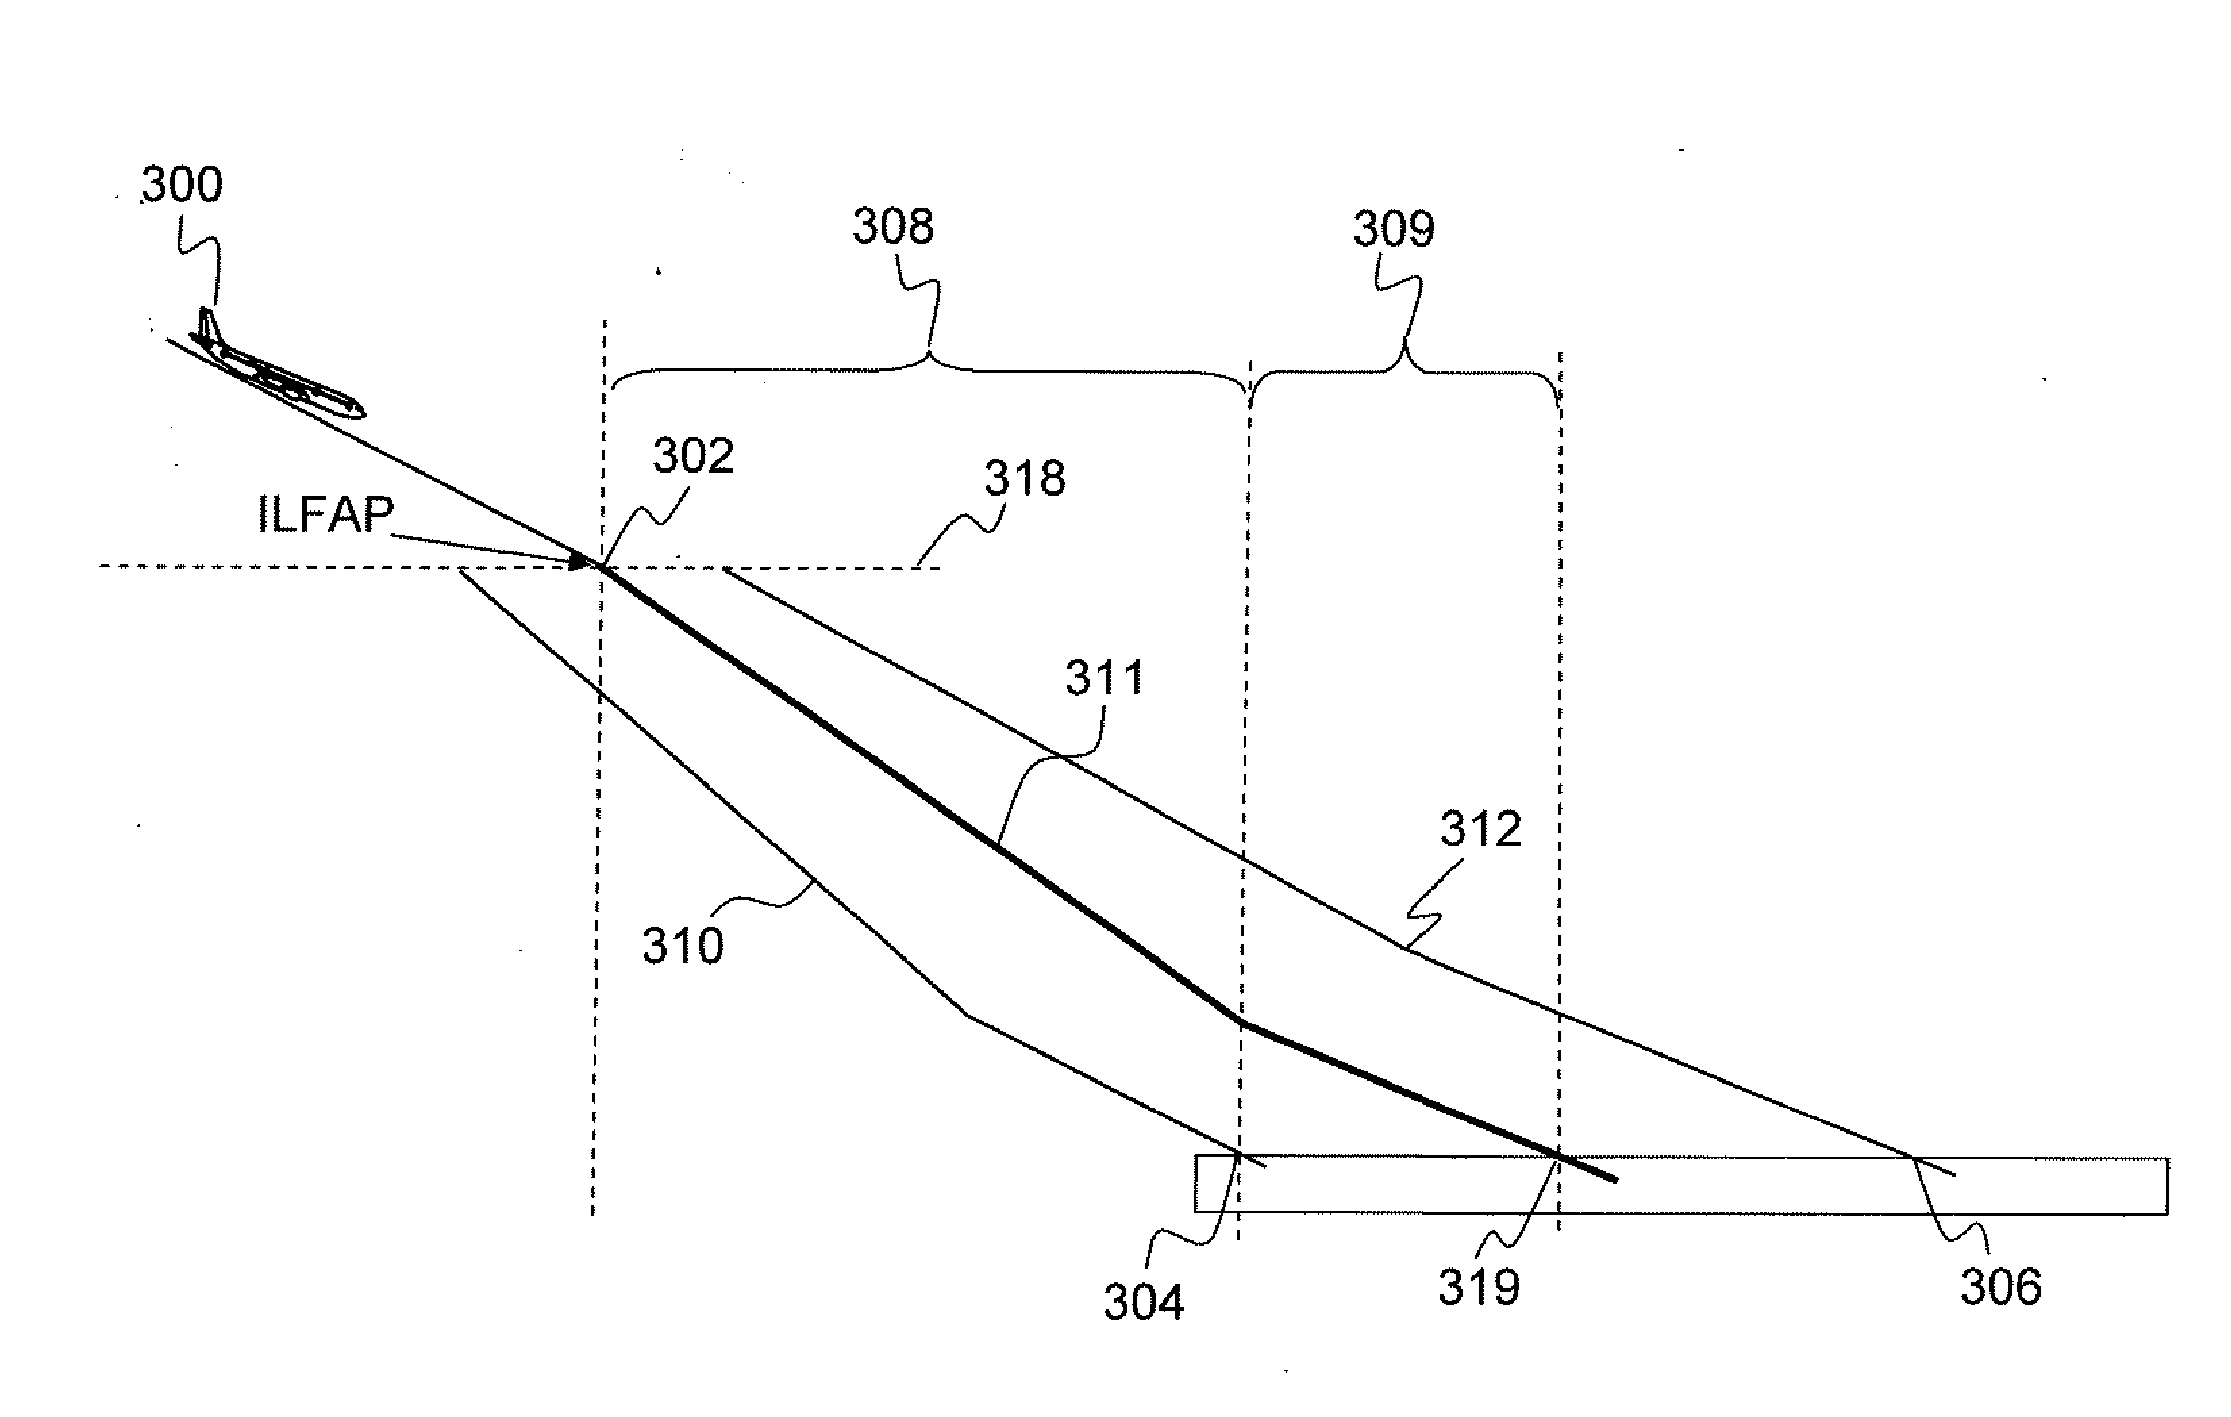 Method for calculating an approach trajectory of an aircraft to an airport